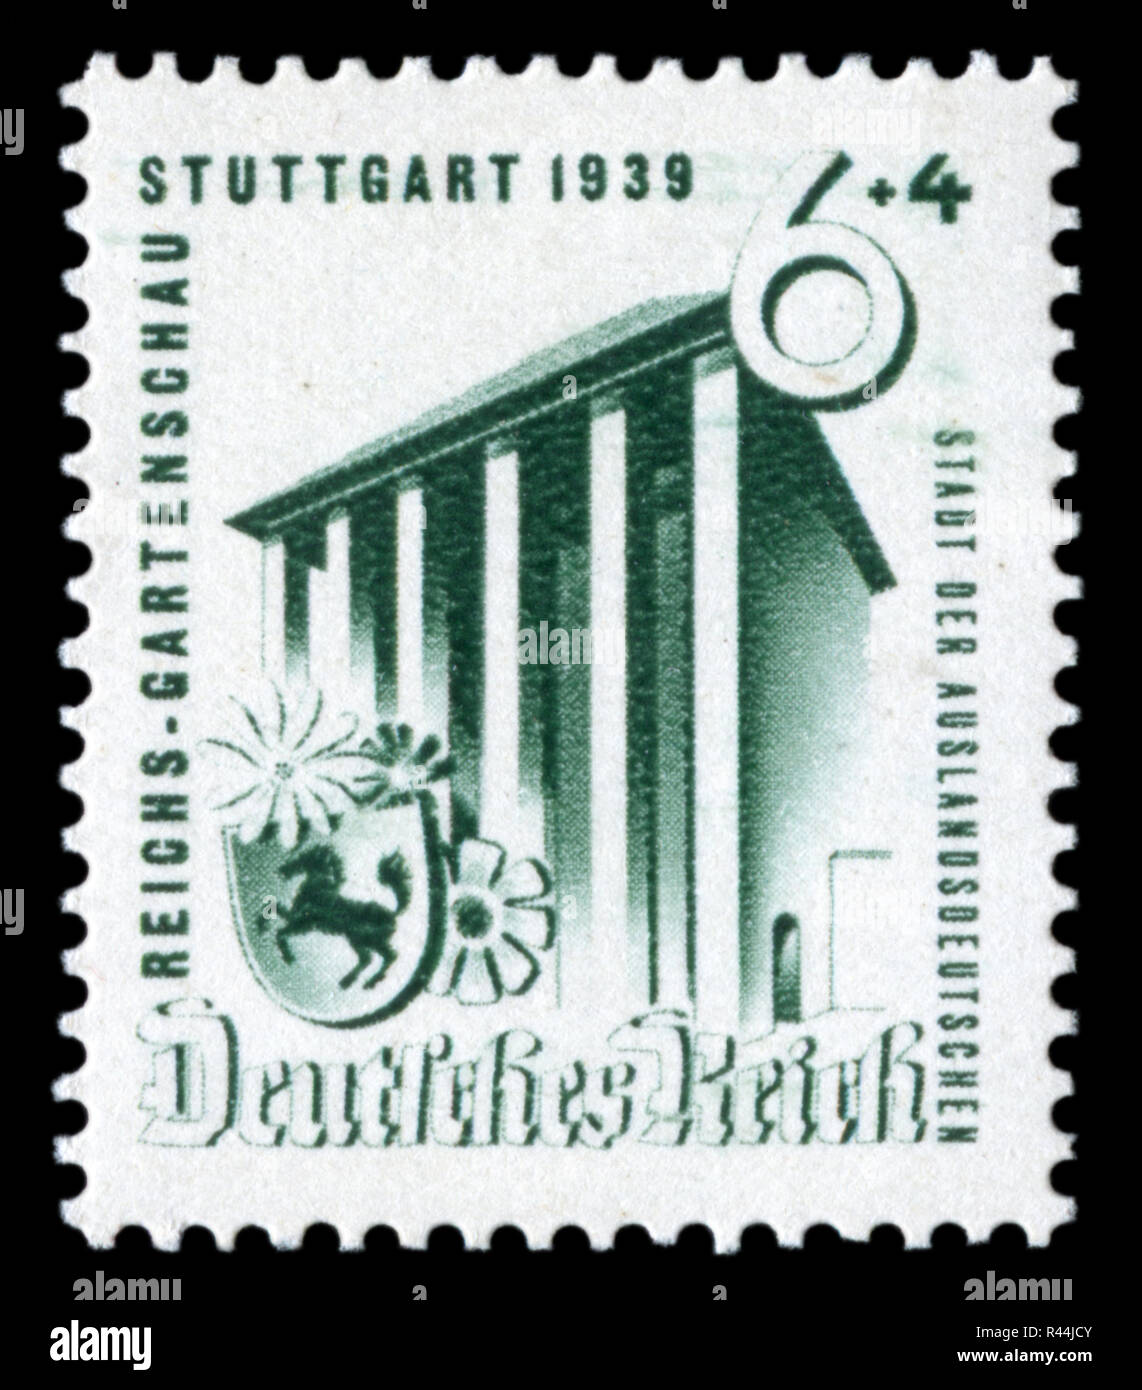 German historical stamp: Exhibition of horticulture in Stuttgart, 1939. Exhibition pavilion and coat of arms of Stuttgart. Germany, the Third Reich. Stock Photo